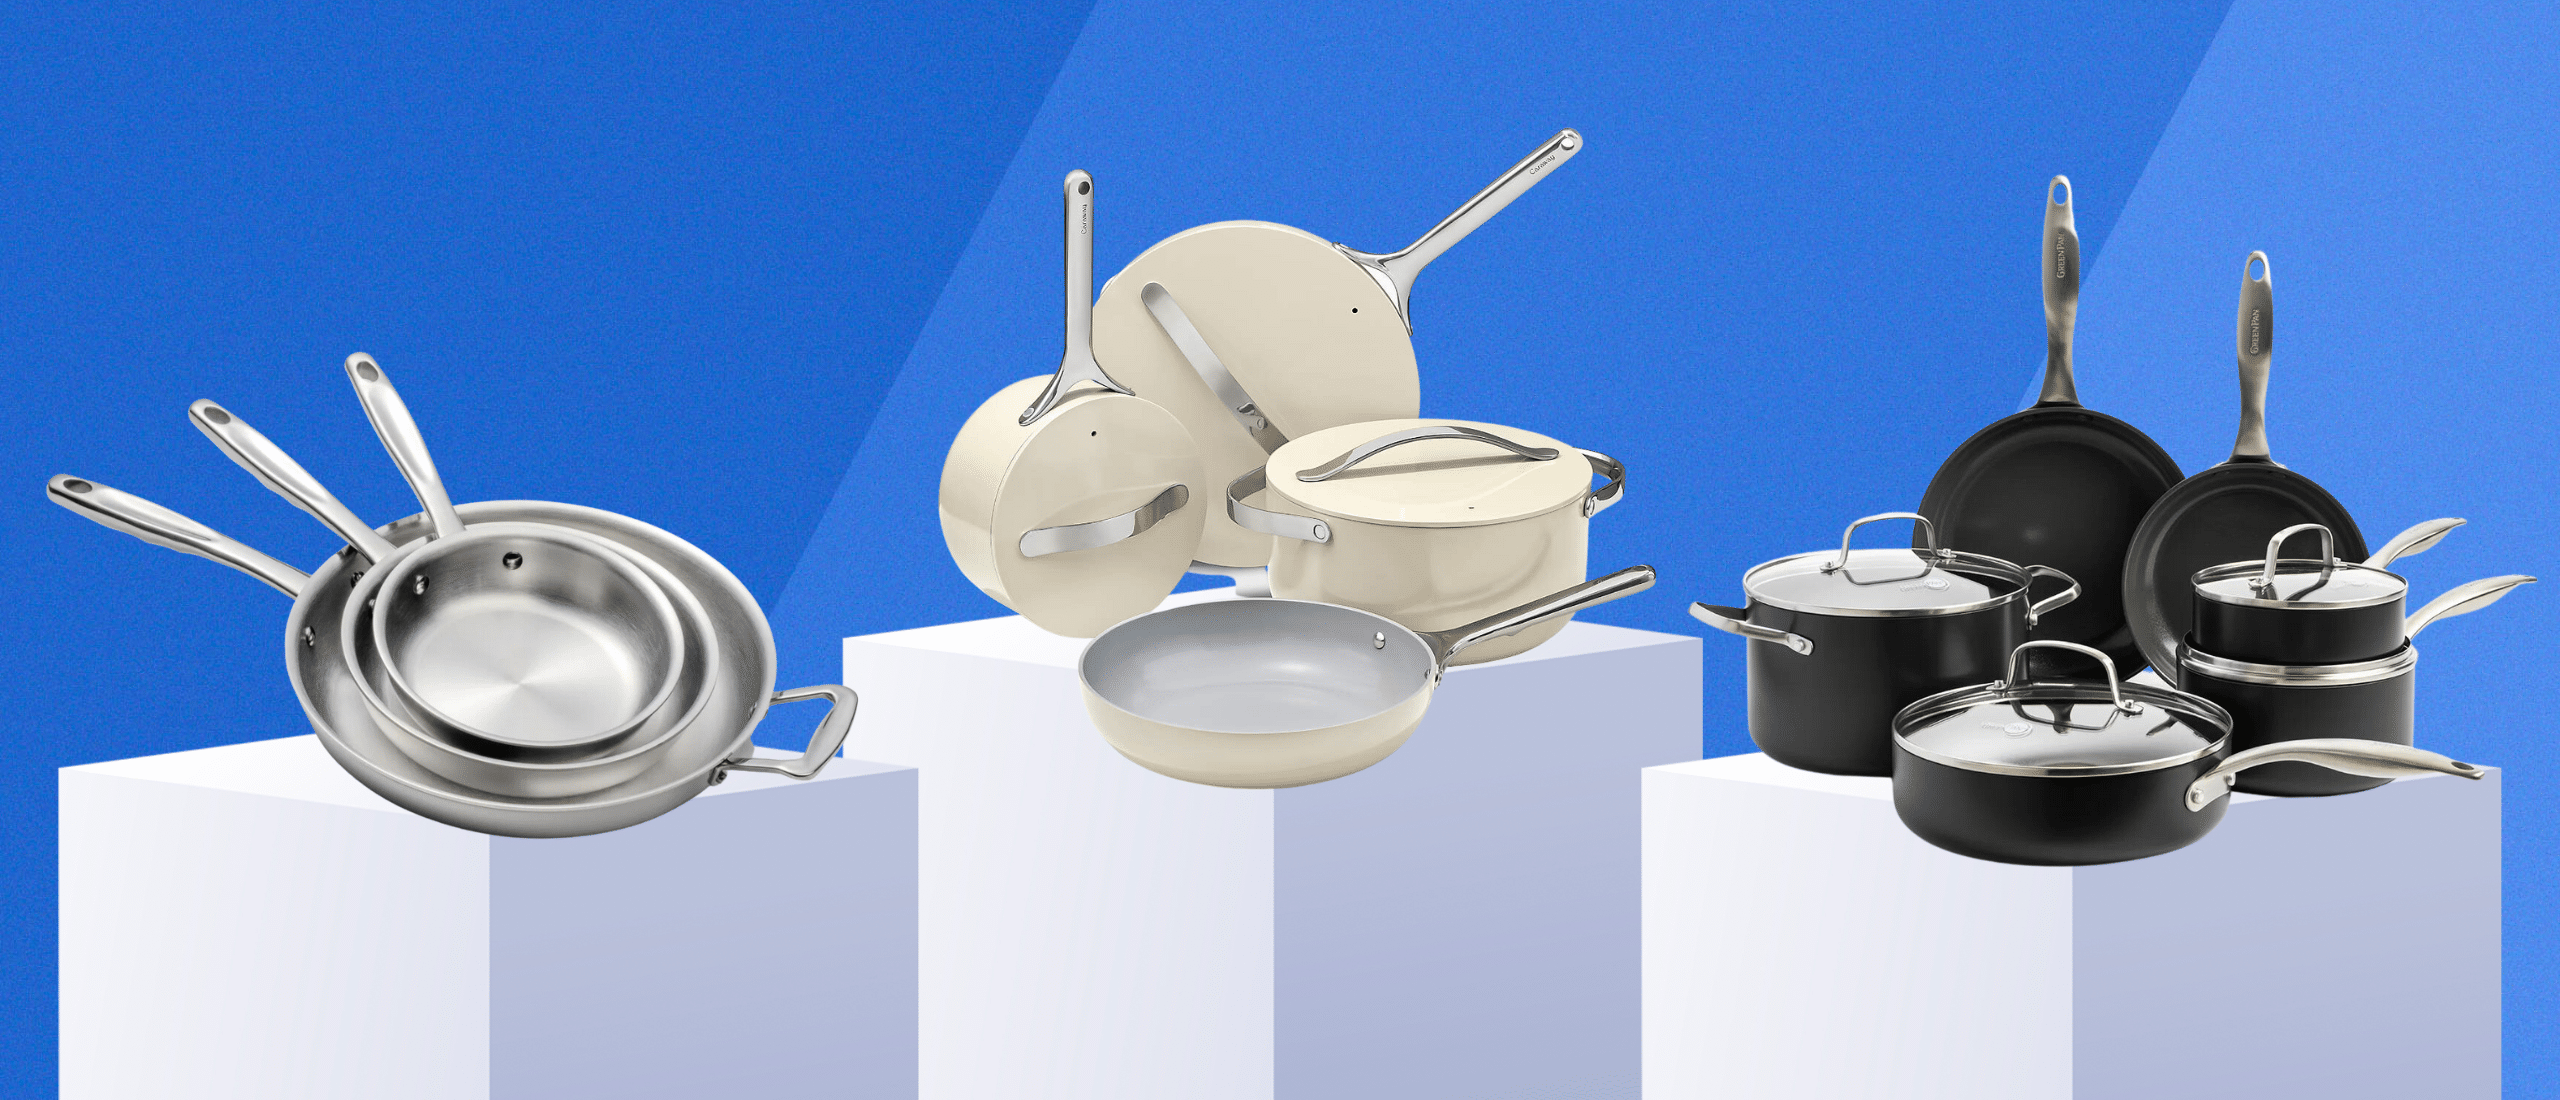 Best PFOA And PTFE Free Cookware of 2023 [Updated] 